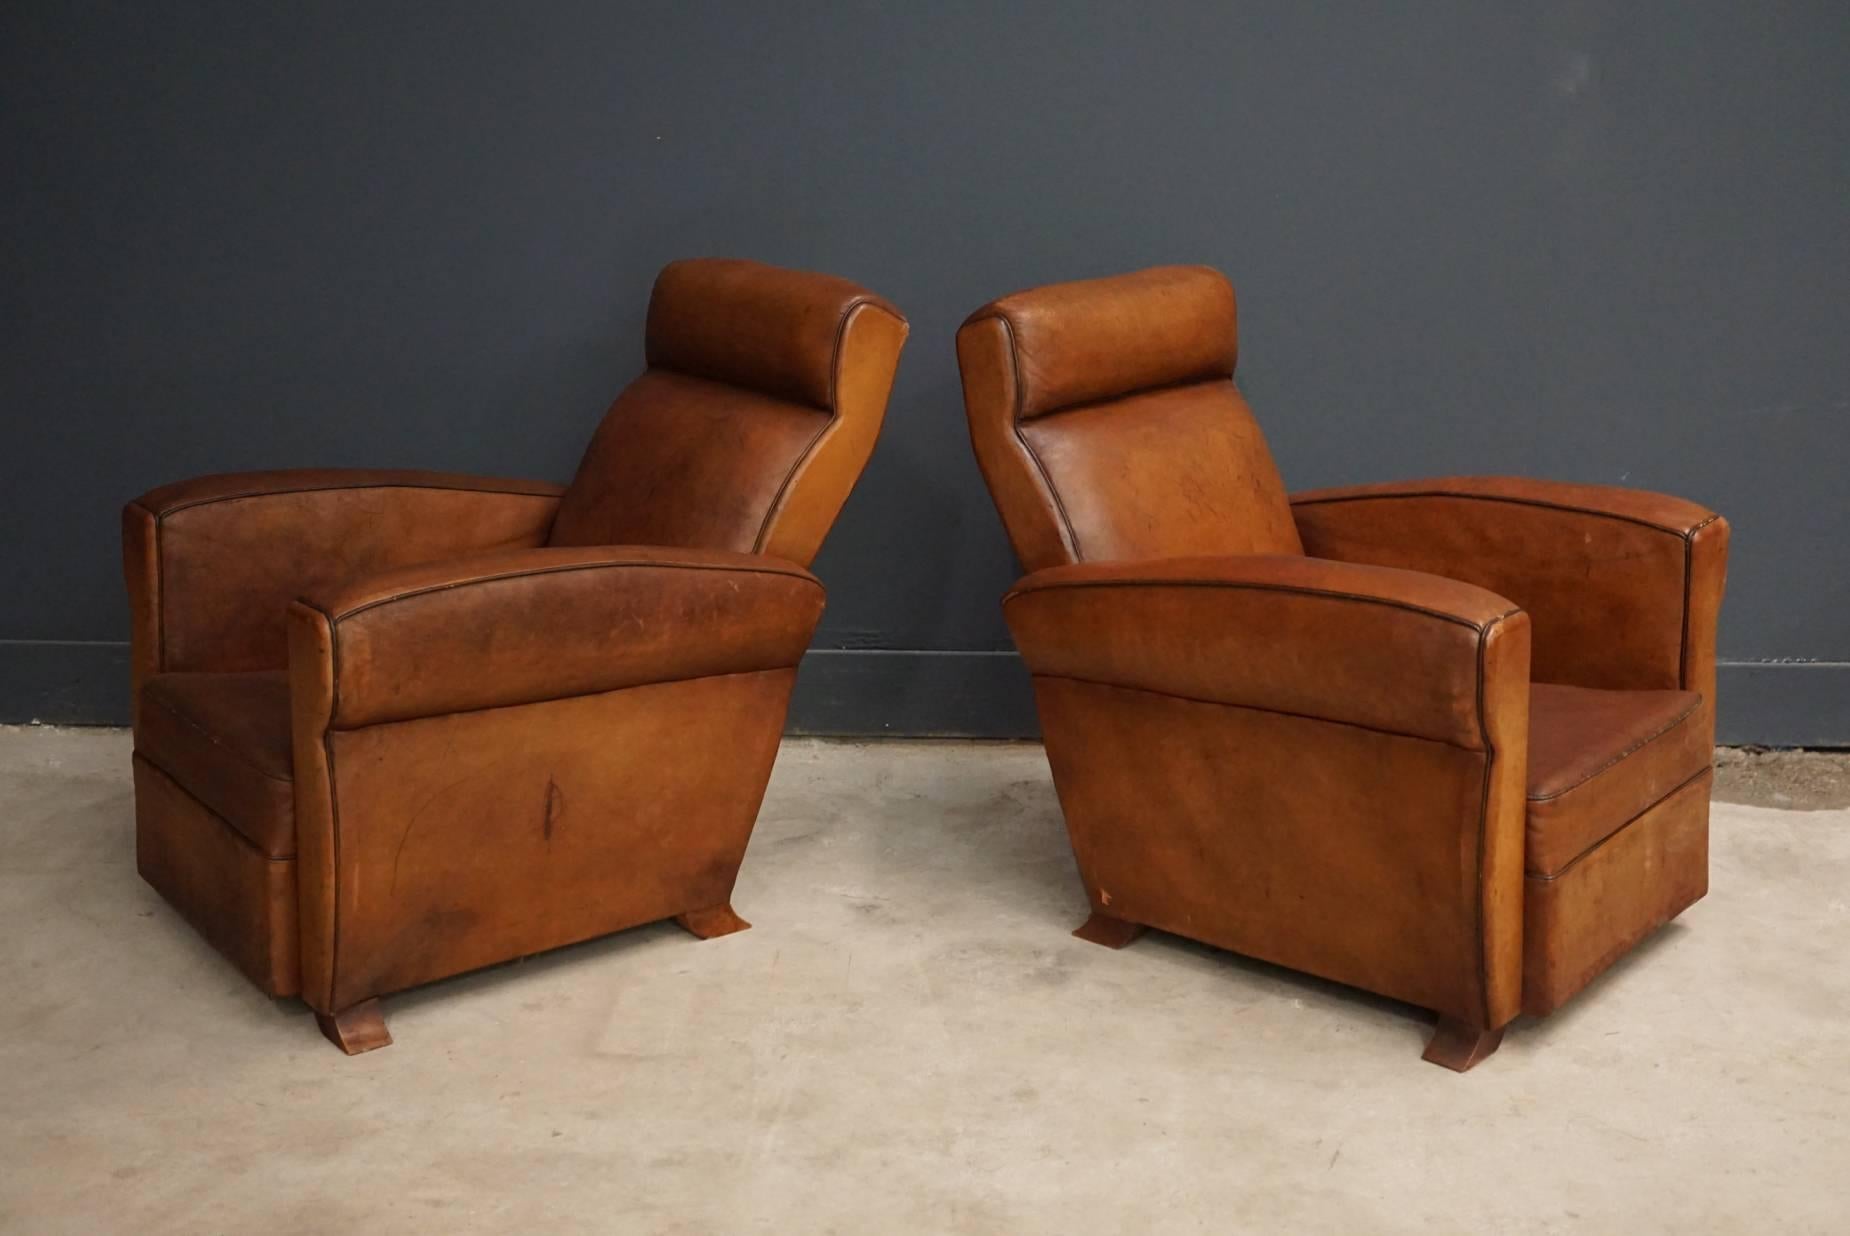 Pair of French Cognac Leather Club Chairs, 1940s (Französisch)